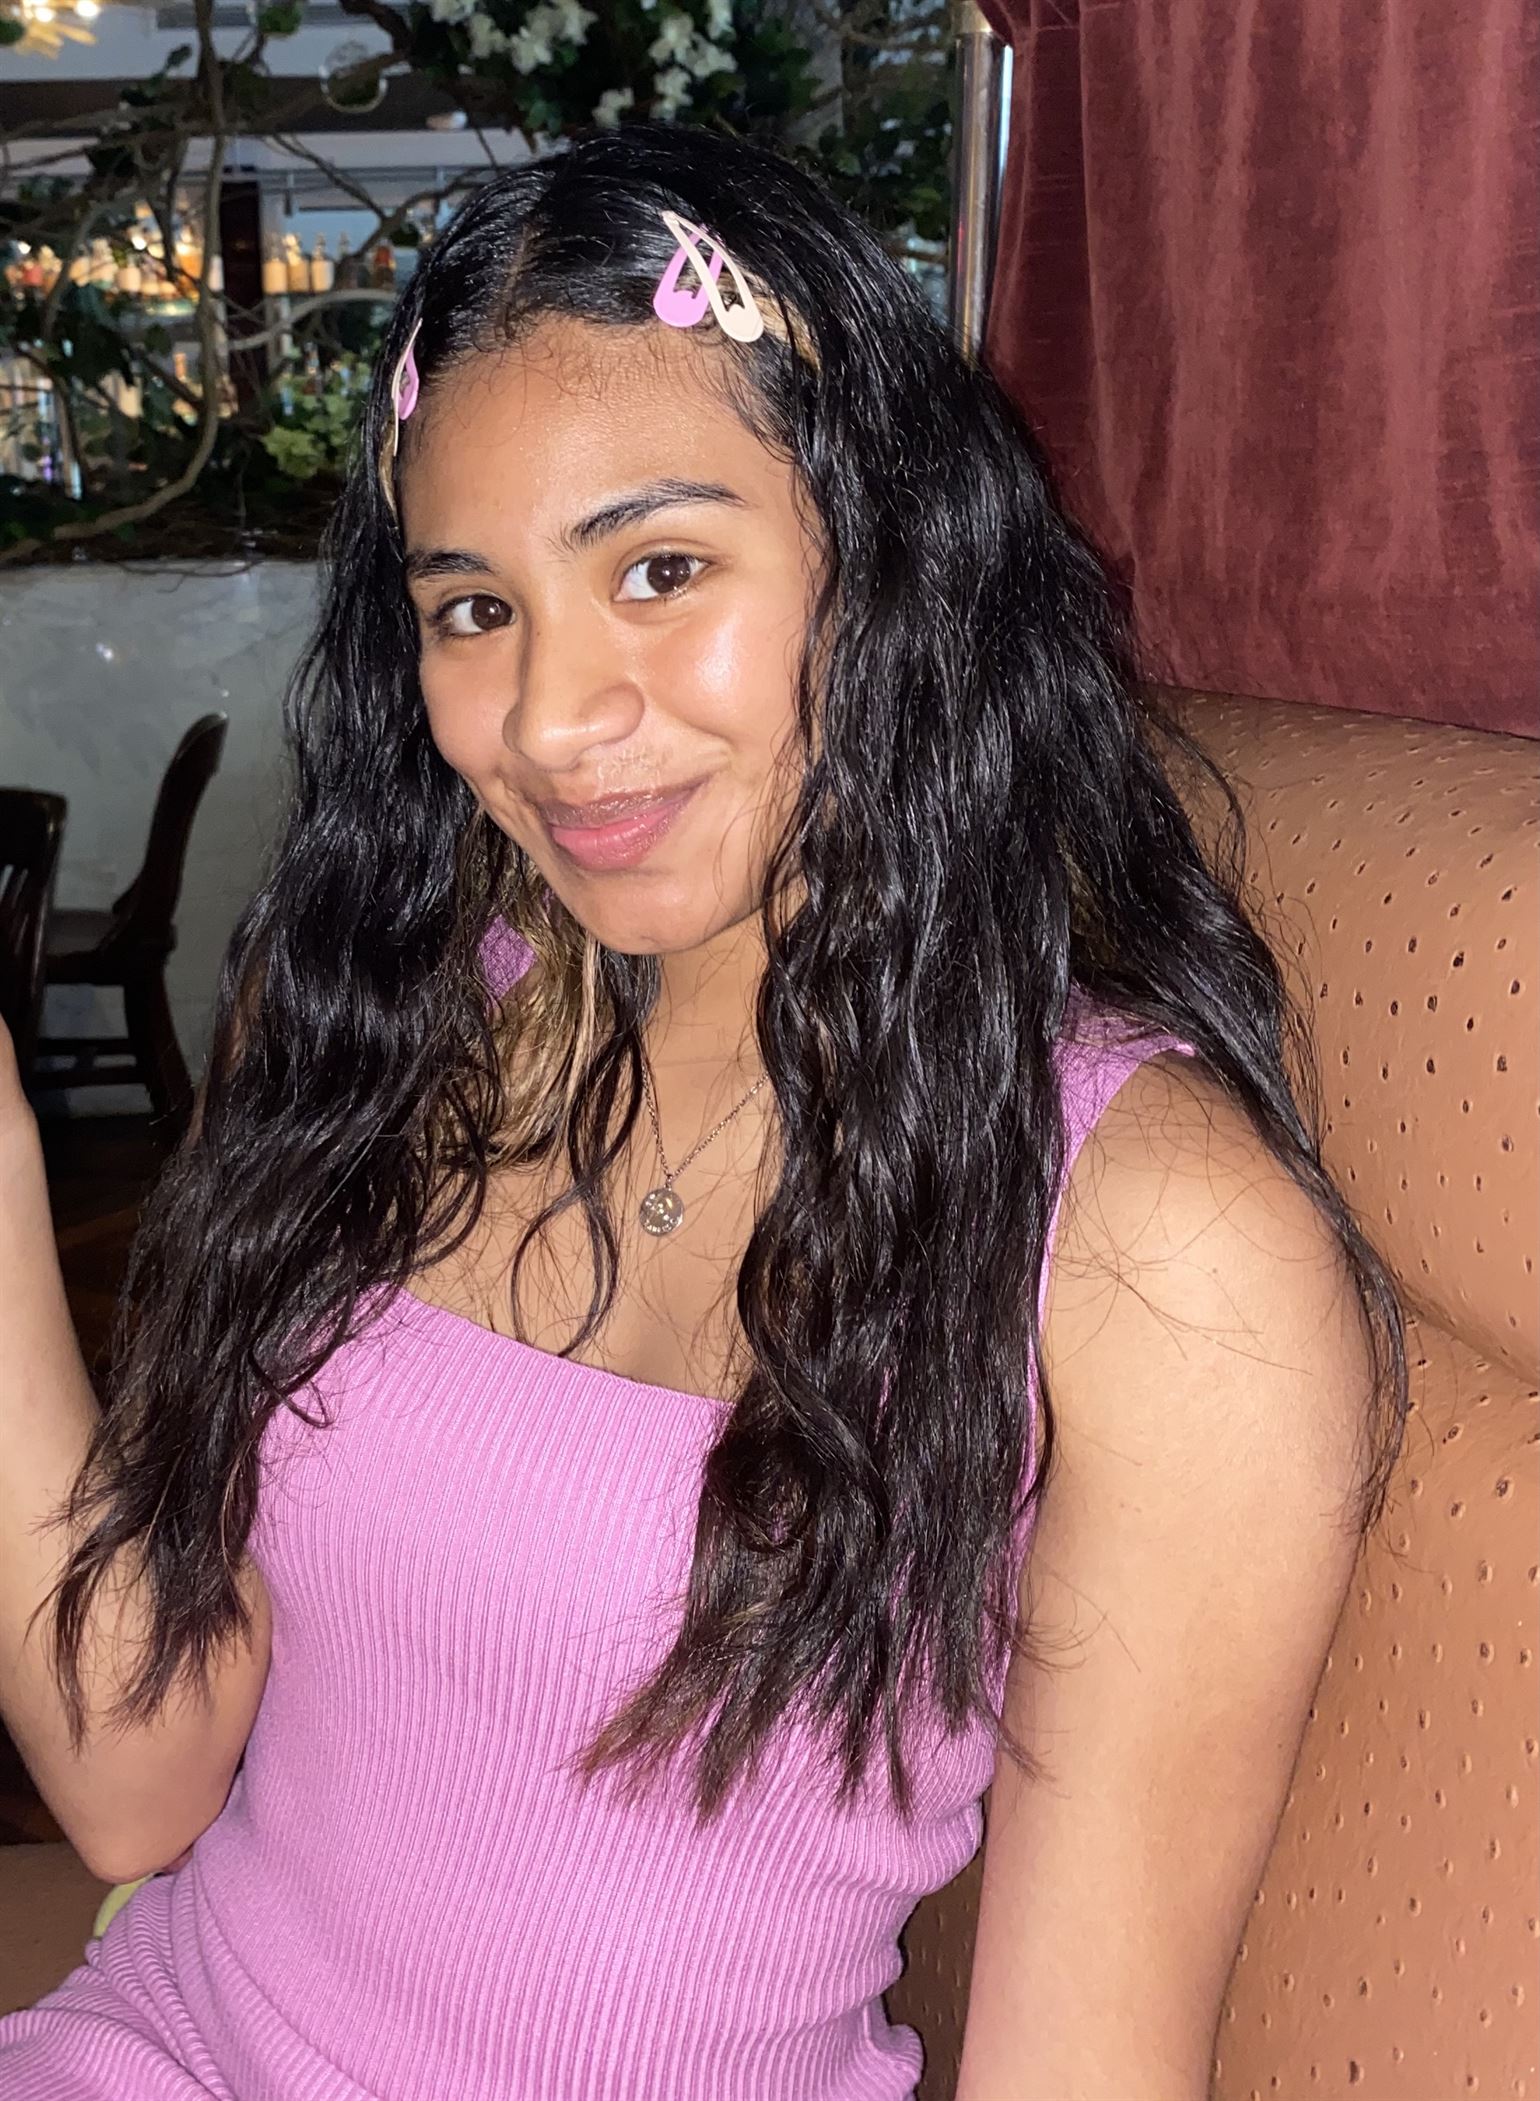 Ivanuska Bailon, a junior physics major, shares her perspective on returning to campus for in-person courses. Photo courtesy of Ivanuska Bailon